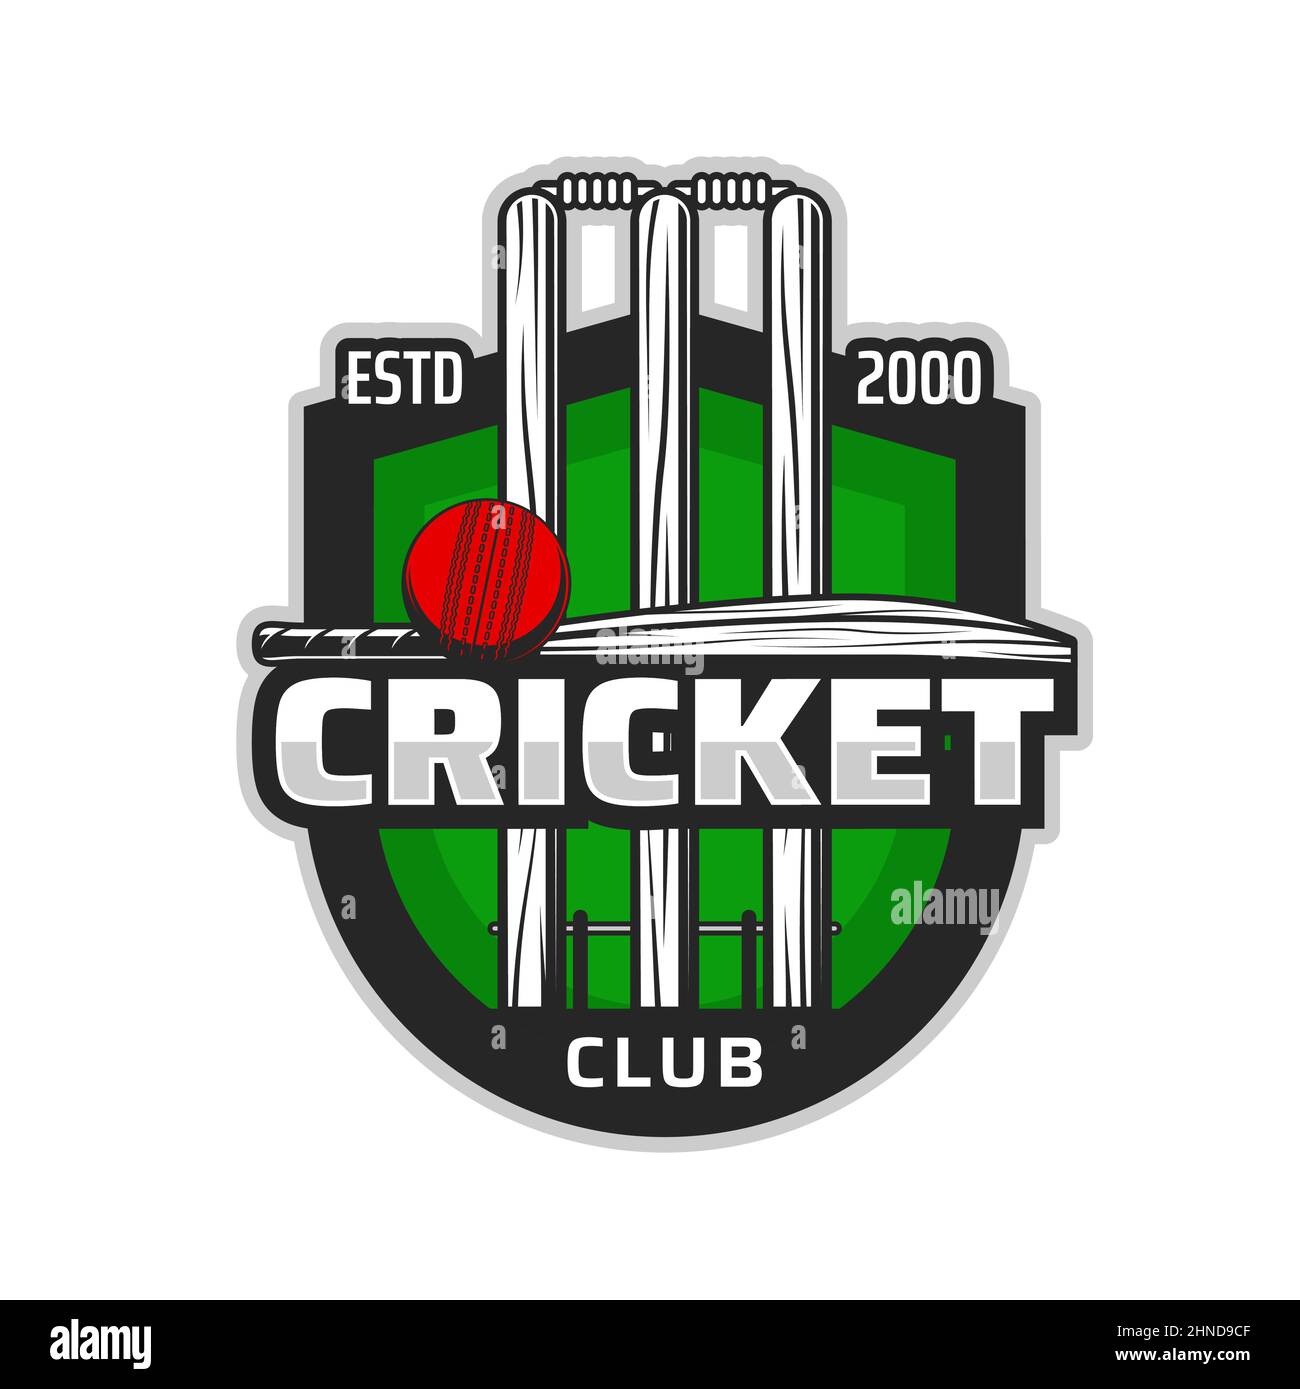 Cricket sport items vector icon of ball with batsman bat and wicket with wood stumps and bails. Cricket game team equipment on green shield badge, spo Stock Vector